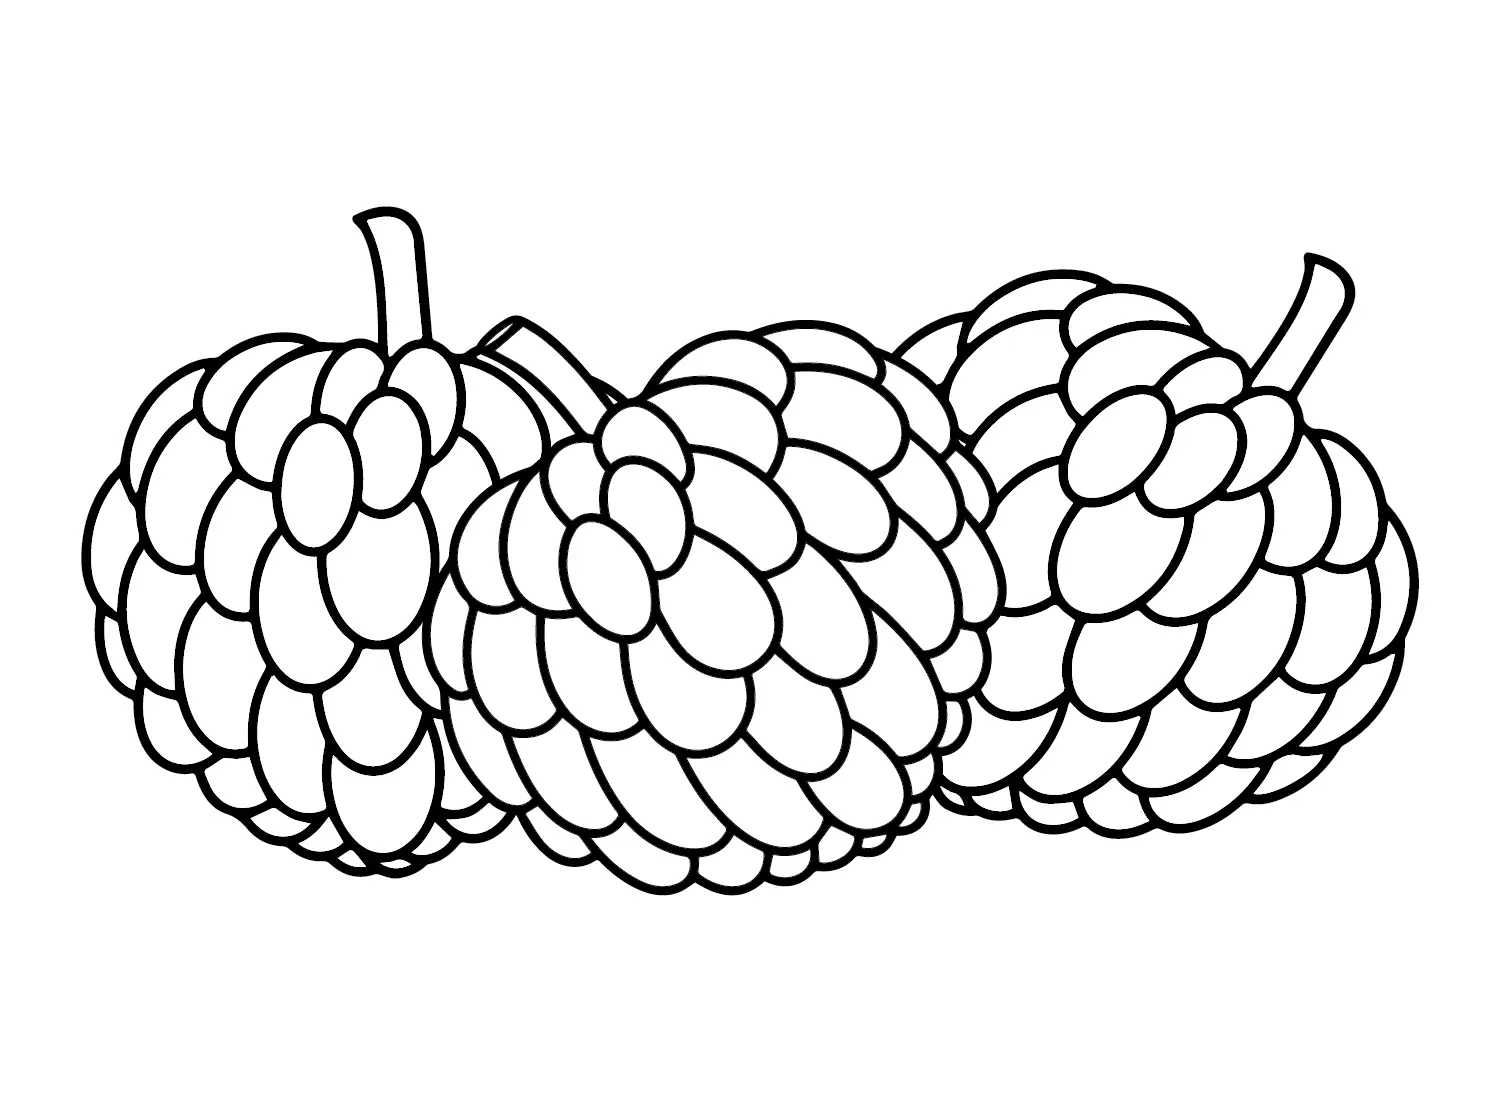 Custard Apple Coloring Pages